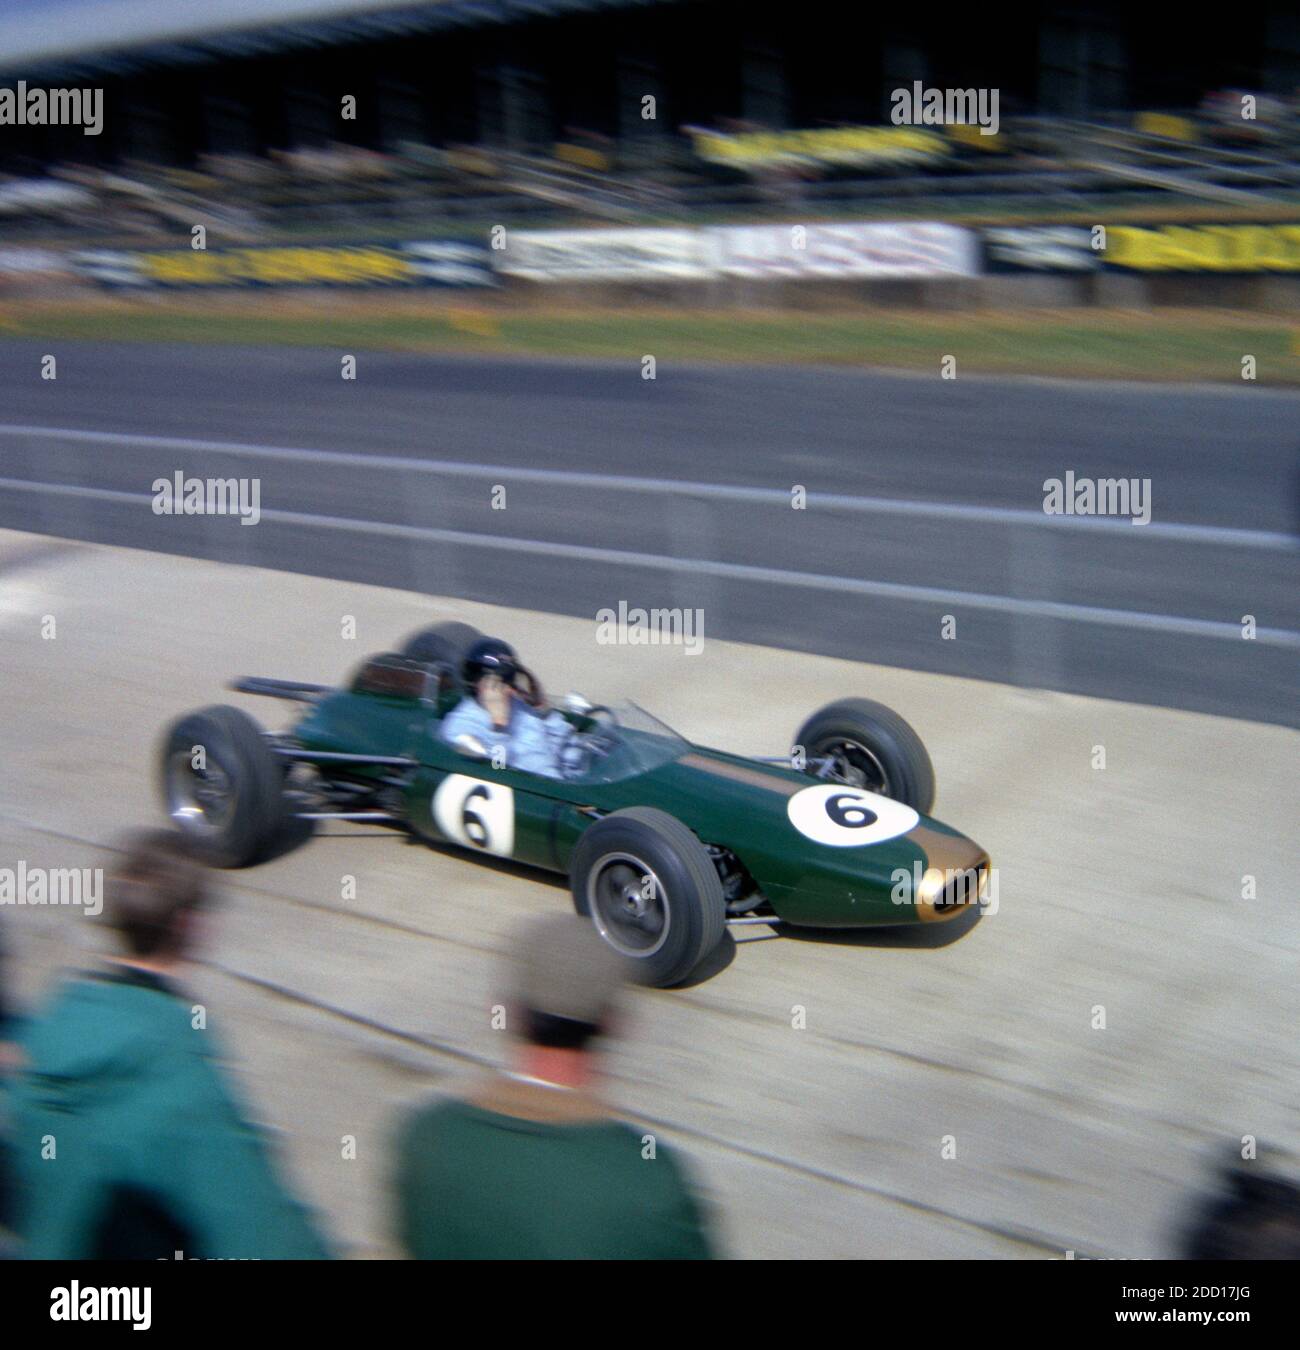 Dan Gurney, Brabham-Climax, descending the pit-road at Silverstone at the start of Practise for the 1964 BRDC International Trophy Race 1st May 1964 Stock Photo